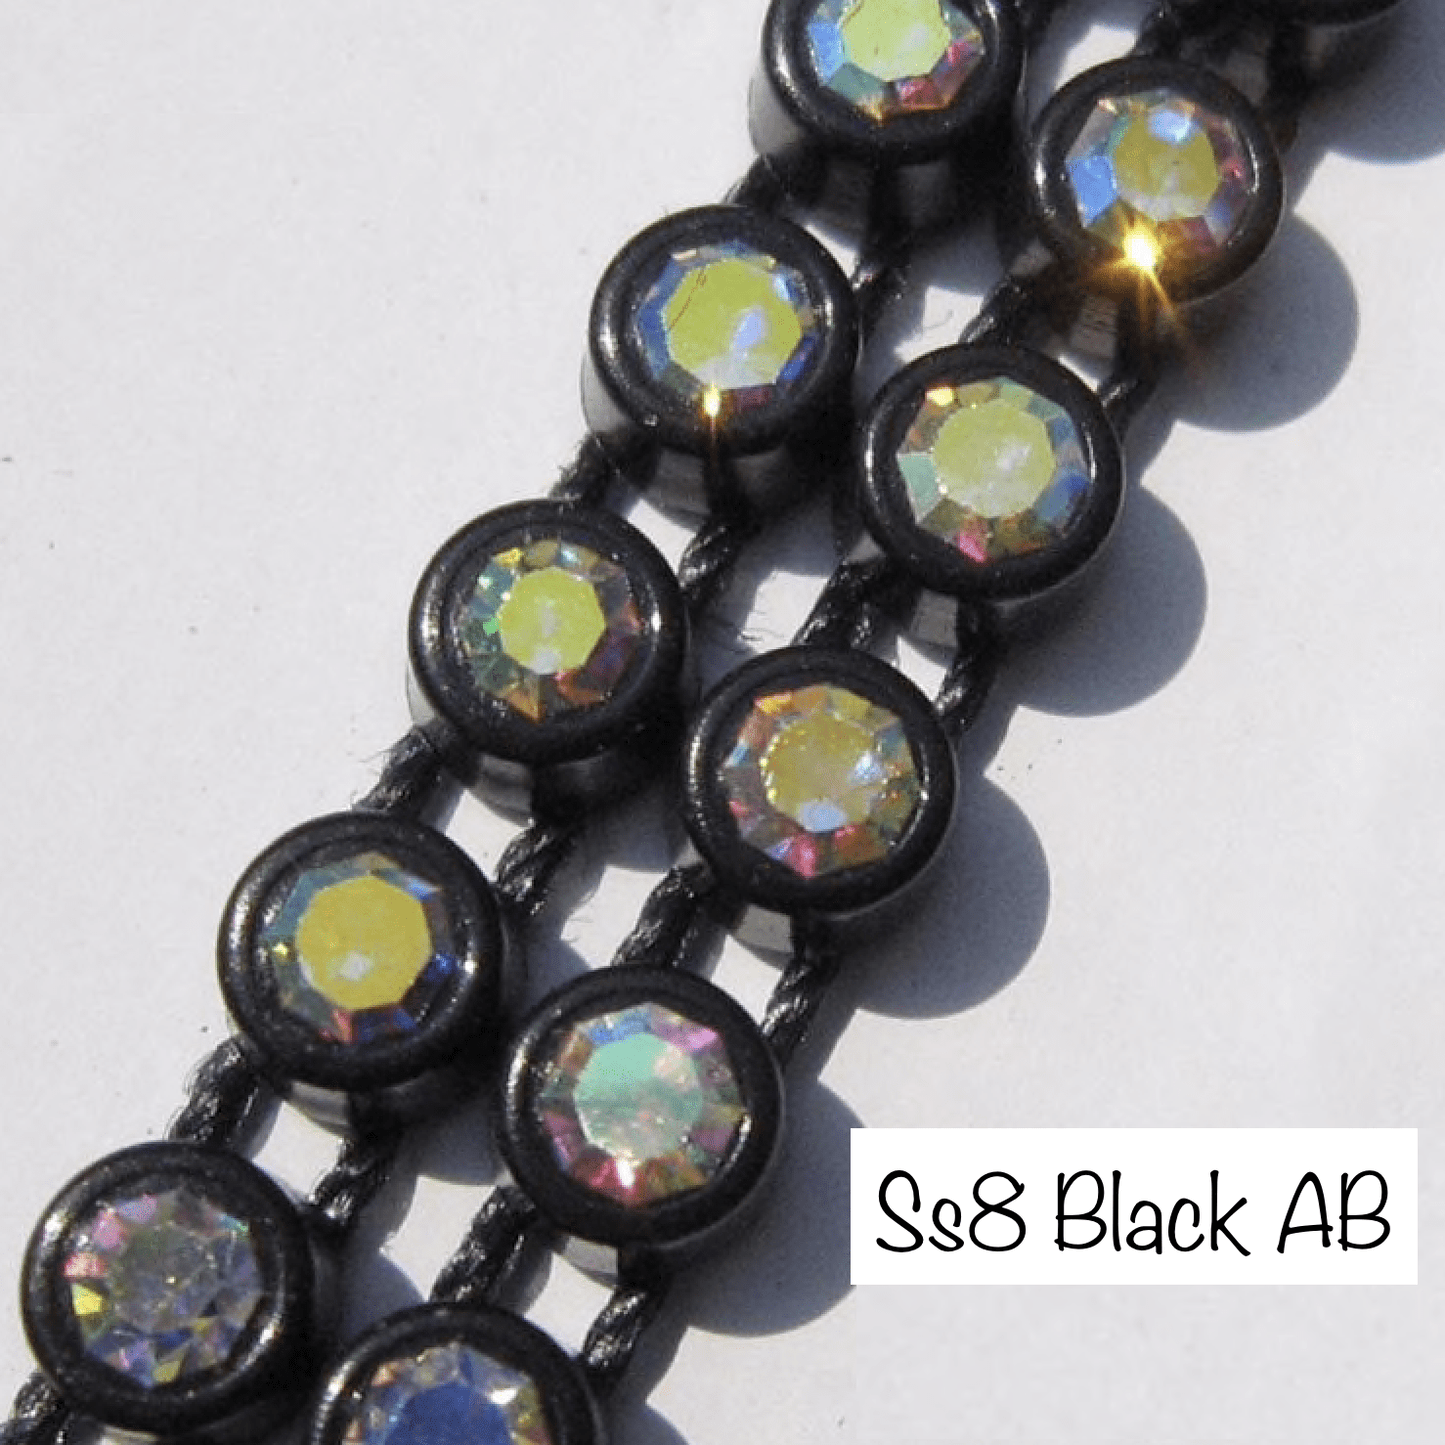 Sundaylace Creations & Bling Ss8 Plastic Rhinestone Banding Rope SS8 Plastic Rhinestone Chain Banding, Black AB, Plastic Rhinestone Plastic Chain Rope Banding, Sold in Yard